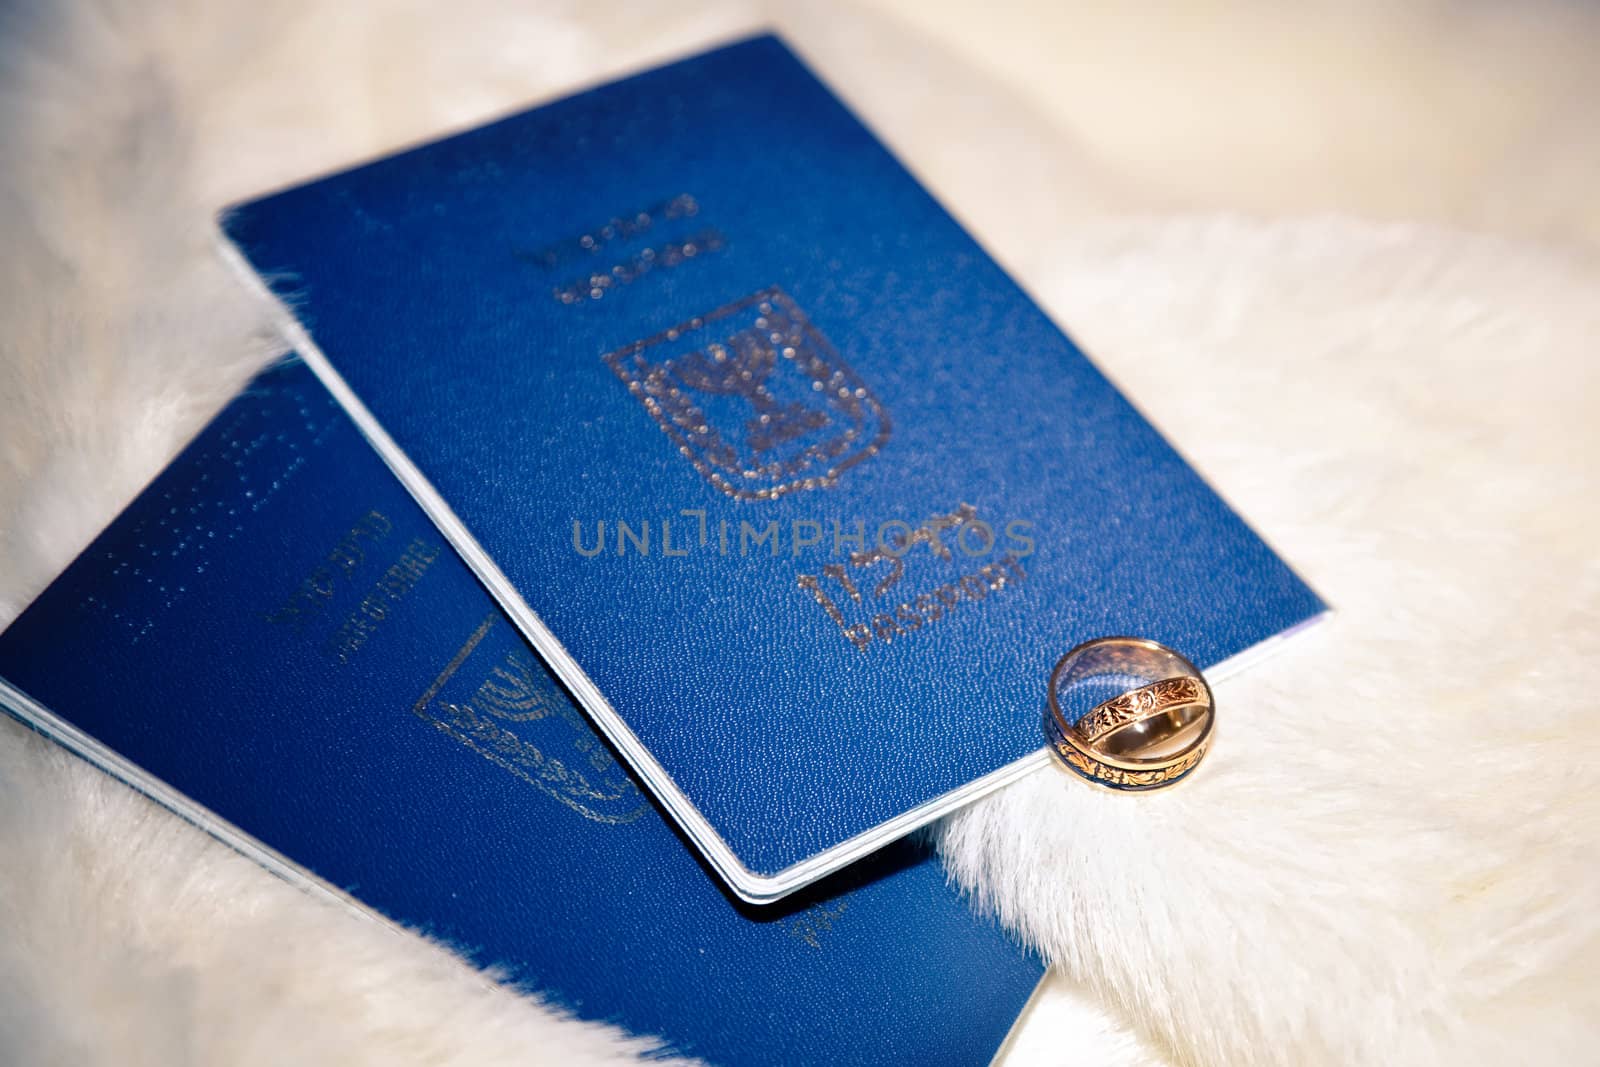 wedding rings and passports of Israel on boa